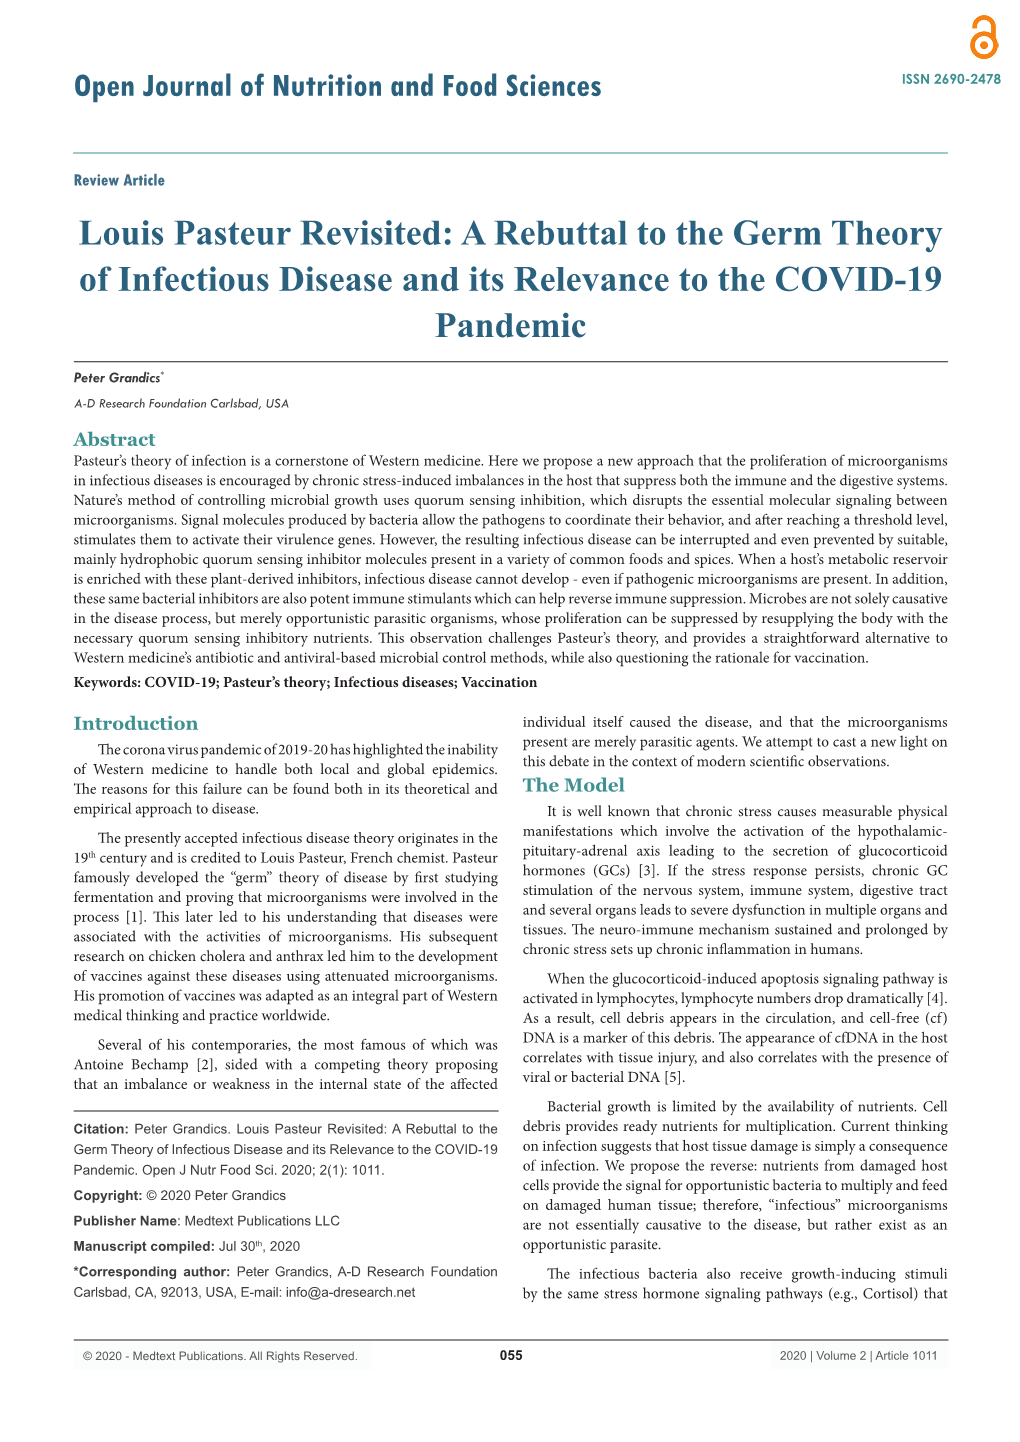 Louis Pasteur Revisited: a Rebuttal to the Germ Theory of Infectious Disease and Its Relevance to the COVID-19 Pandemic